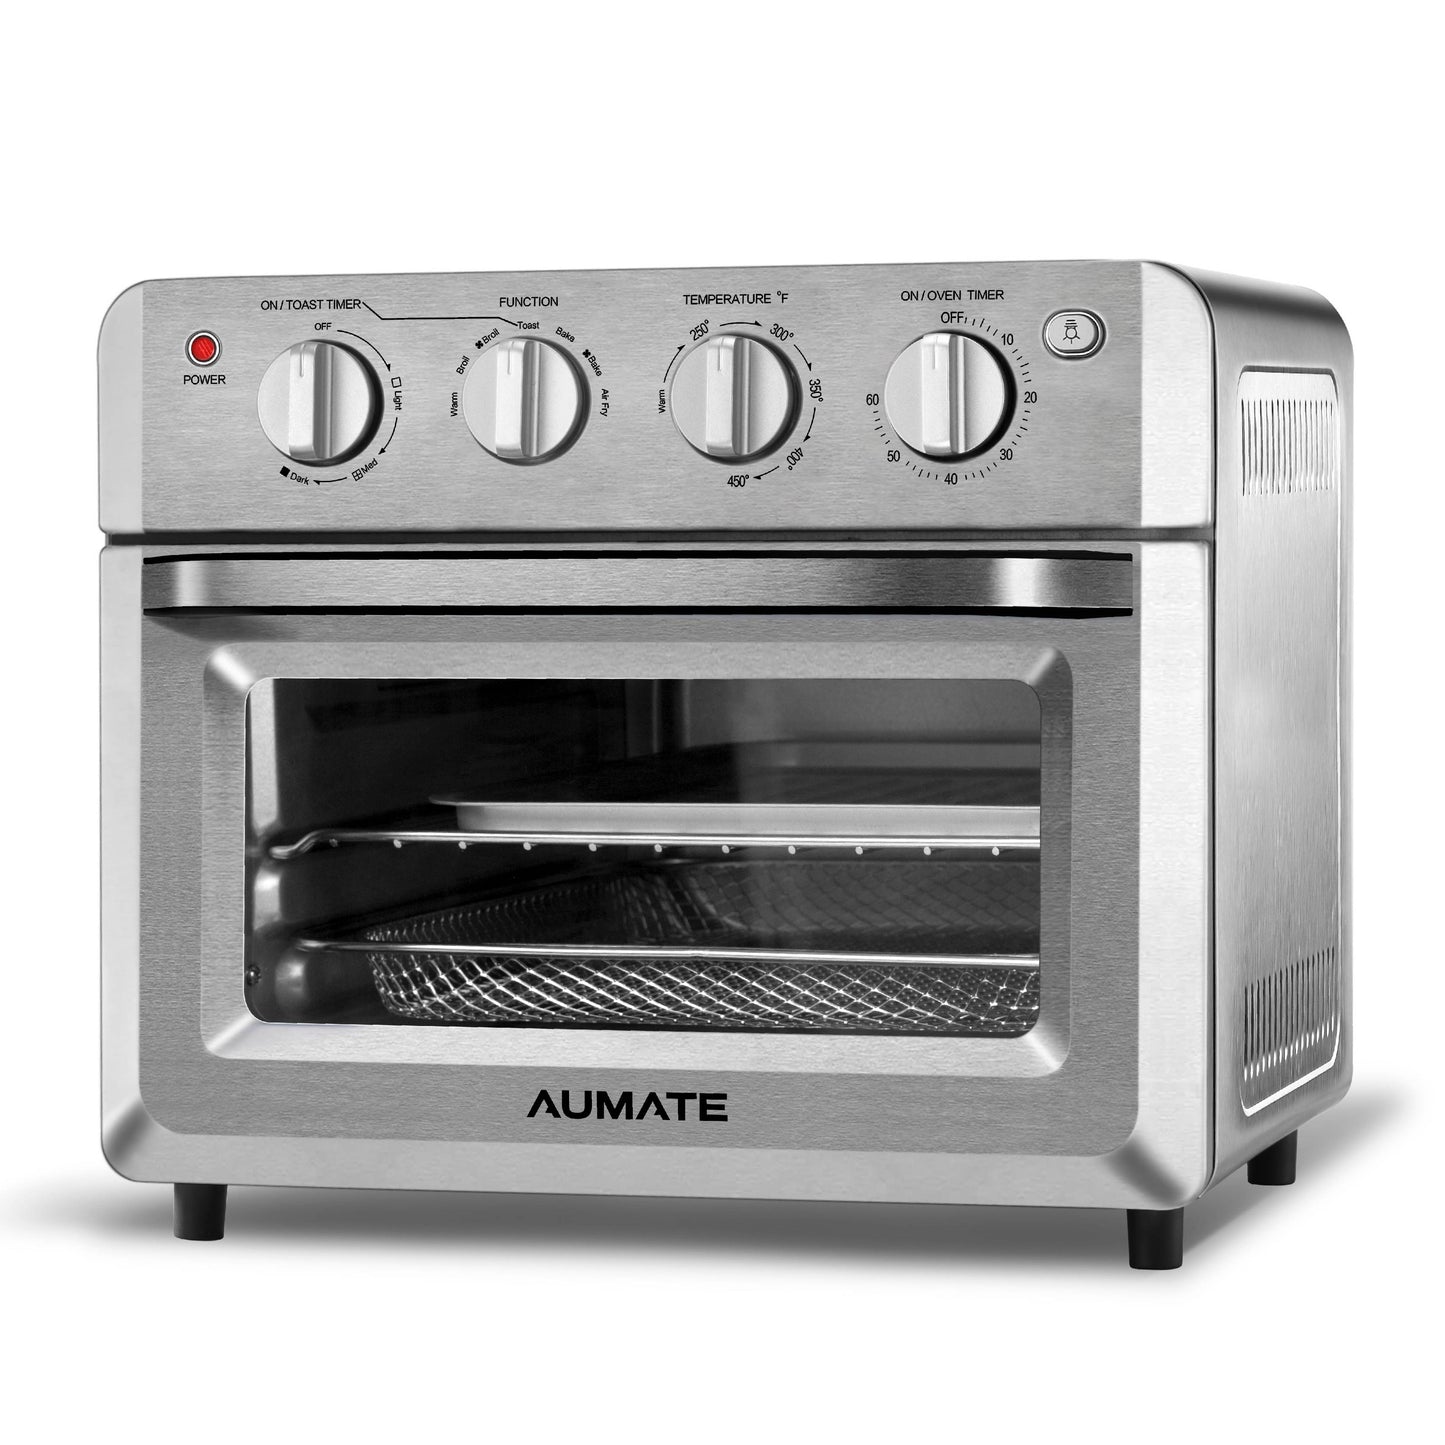 AUMATE Air Fryer Toaster Oven,Convection Oven,7-in-1 Multifunction Air  Fryer Oven,19 QT Countertop Oven,1550W Oilless Knob Control Electric Pizza  Oven with 4 Accessories, Stainless Steel 